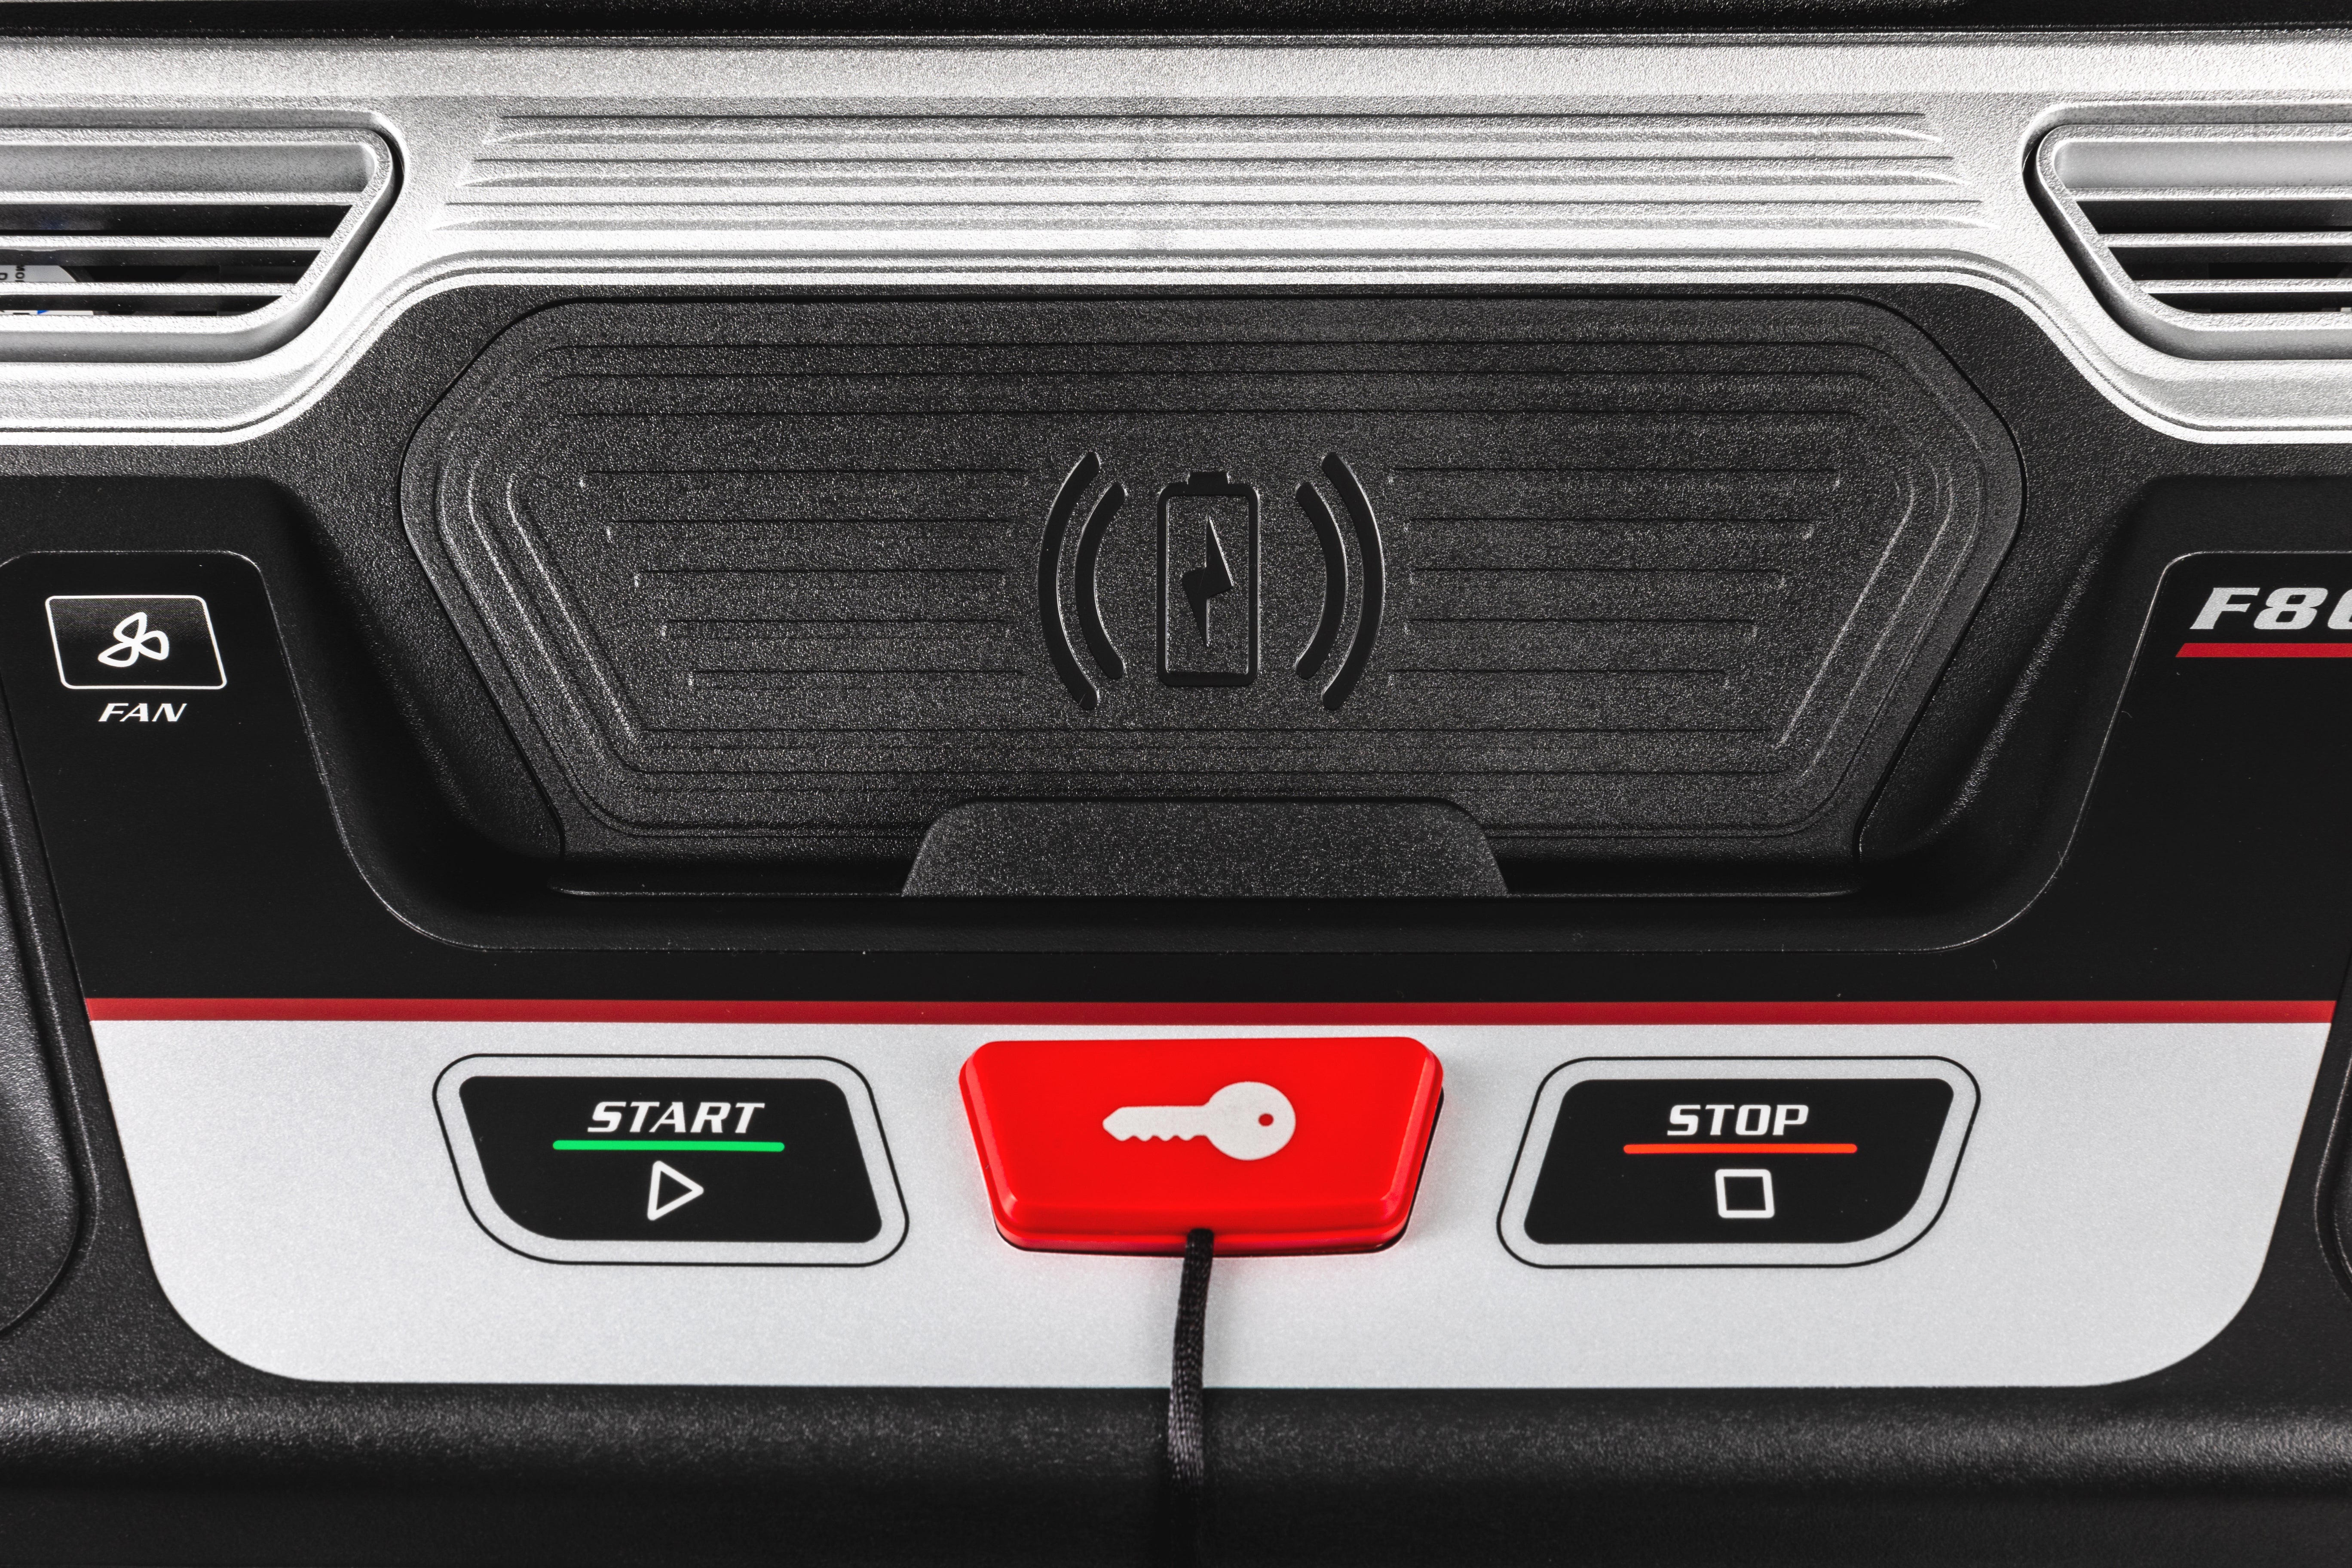 Close-up view of the control panel on the Sole F80 treadmill, showing a "FAN" button on the left, a central tactile button with up and down arrows for adjustments, and the "START" and "STOP" buttons on the right side. A red safety key is inserted next to the "START" button. The "F80" logo is visible in the top right corner.